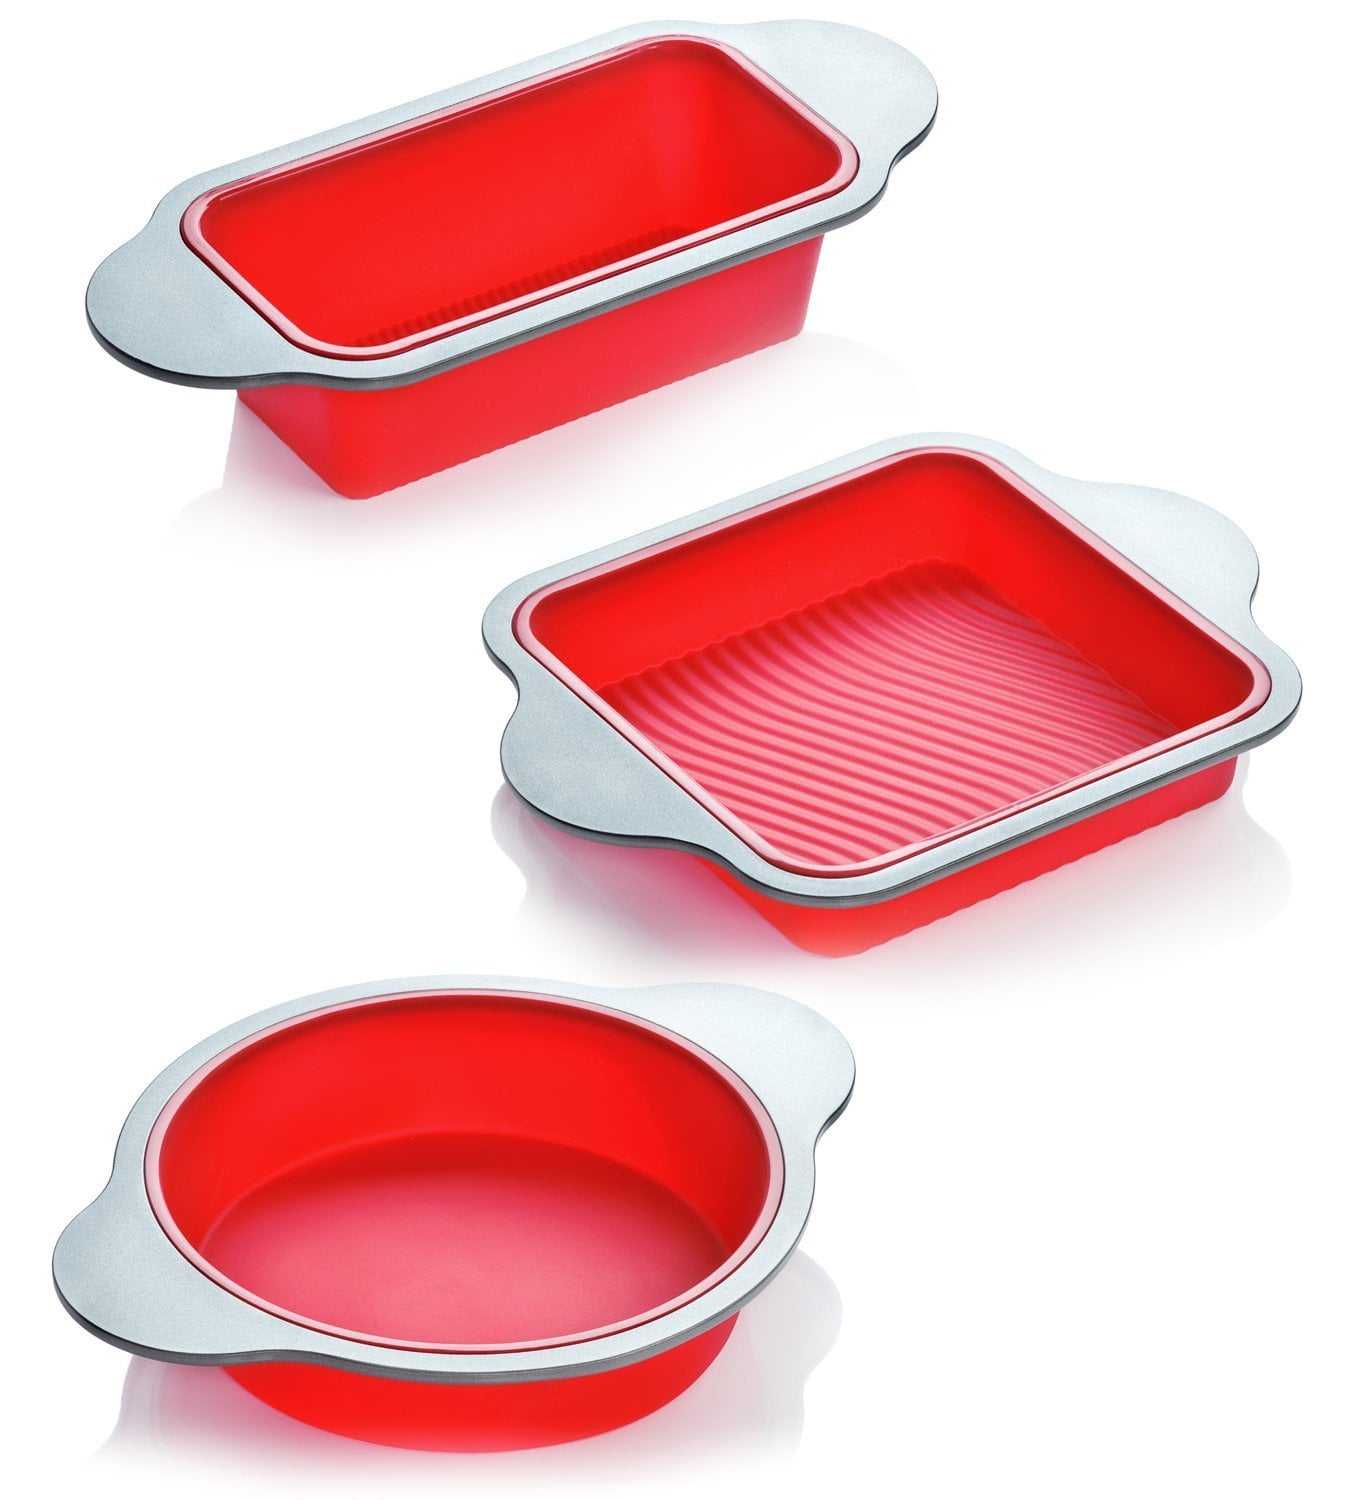 Details about   Silicone Bread Loaf Mold Cake Non Stick Bakeware Baking Pan Oven Soap Mould LD 